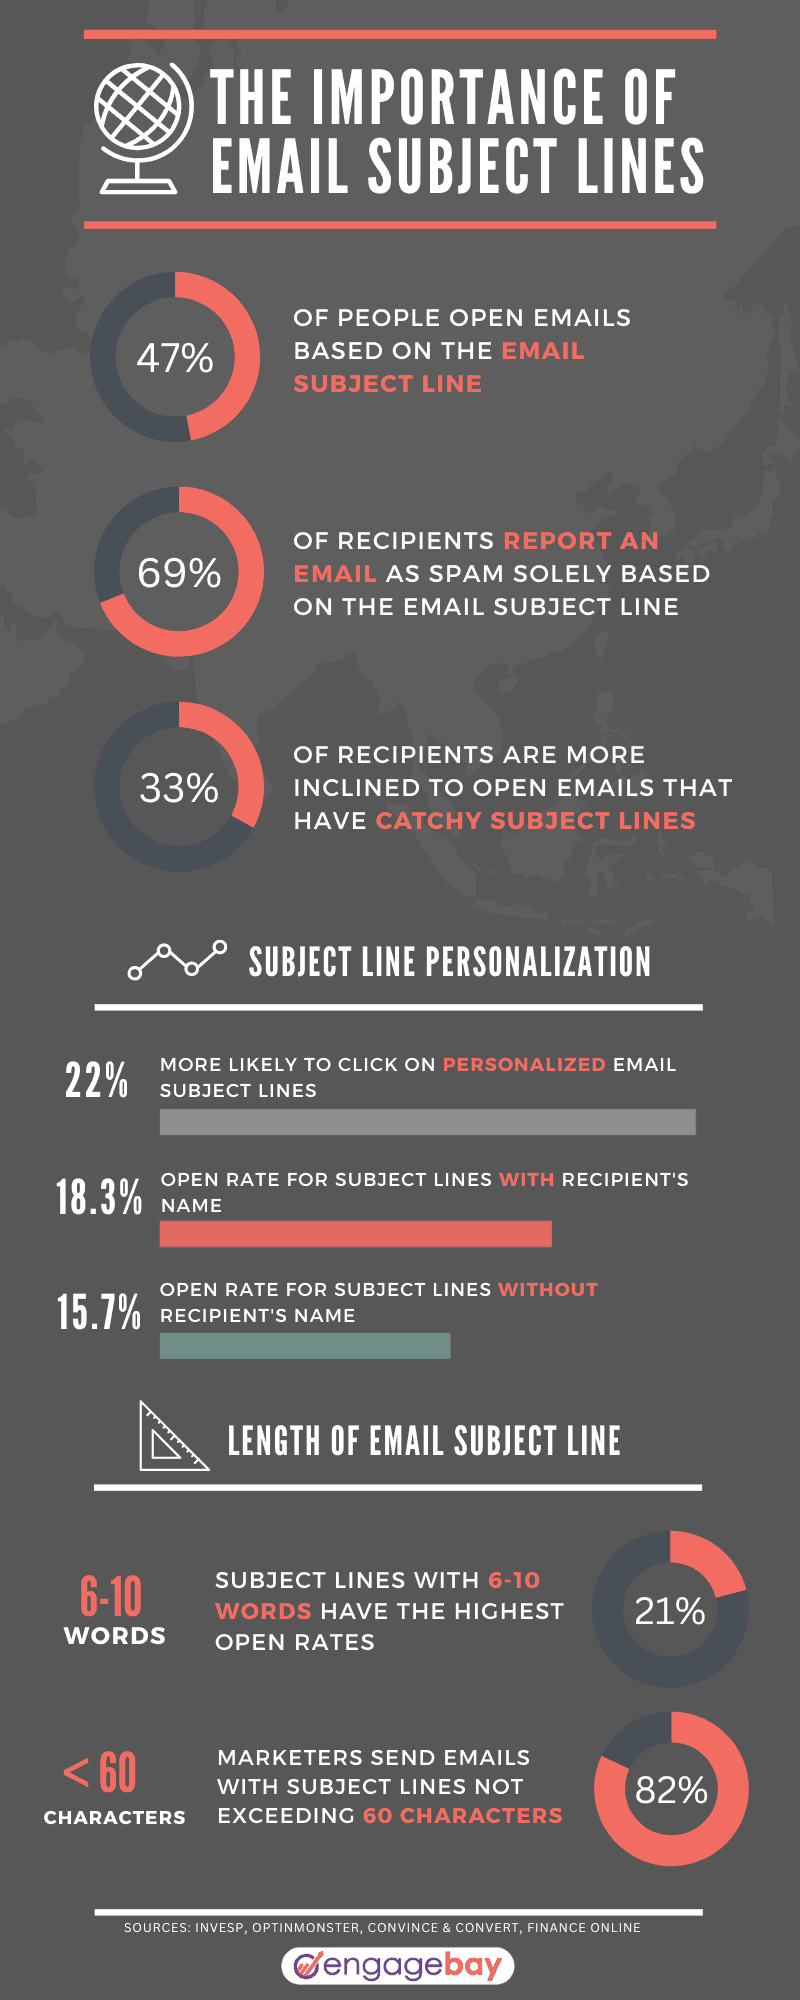 Email subject lines infographic